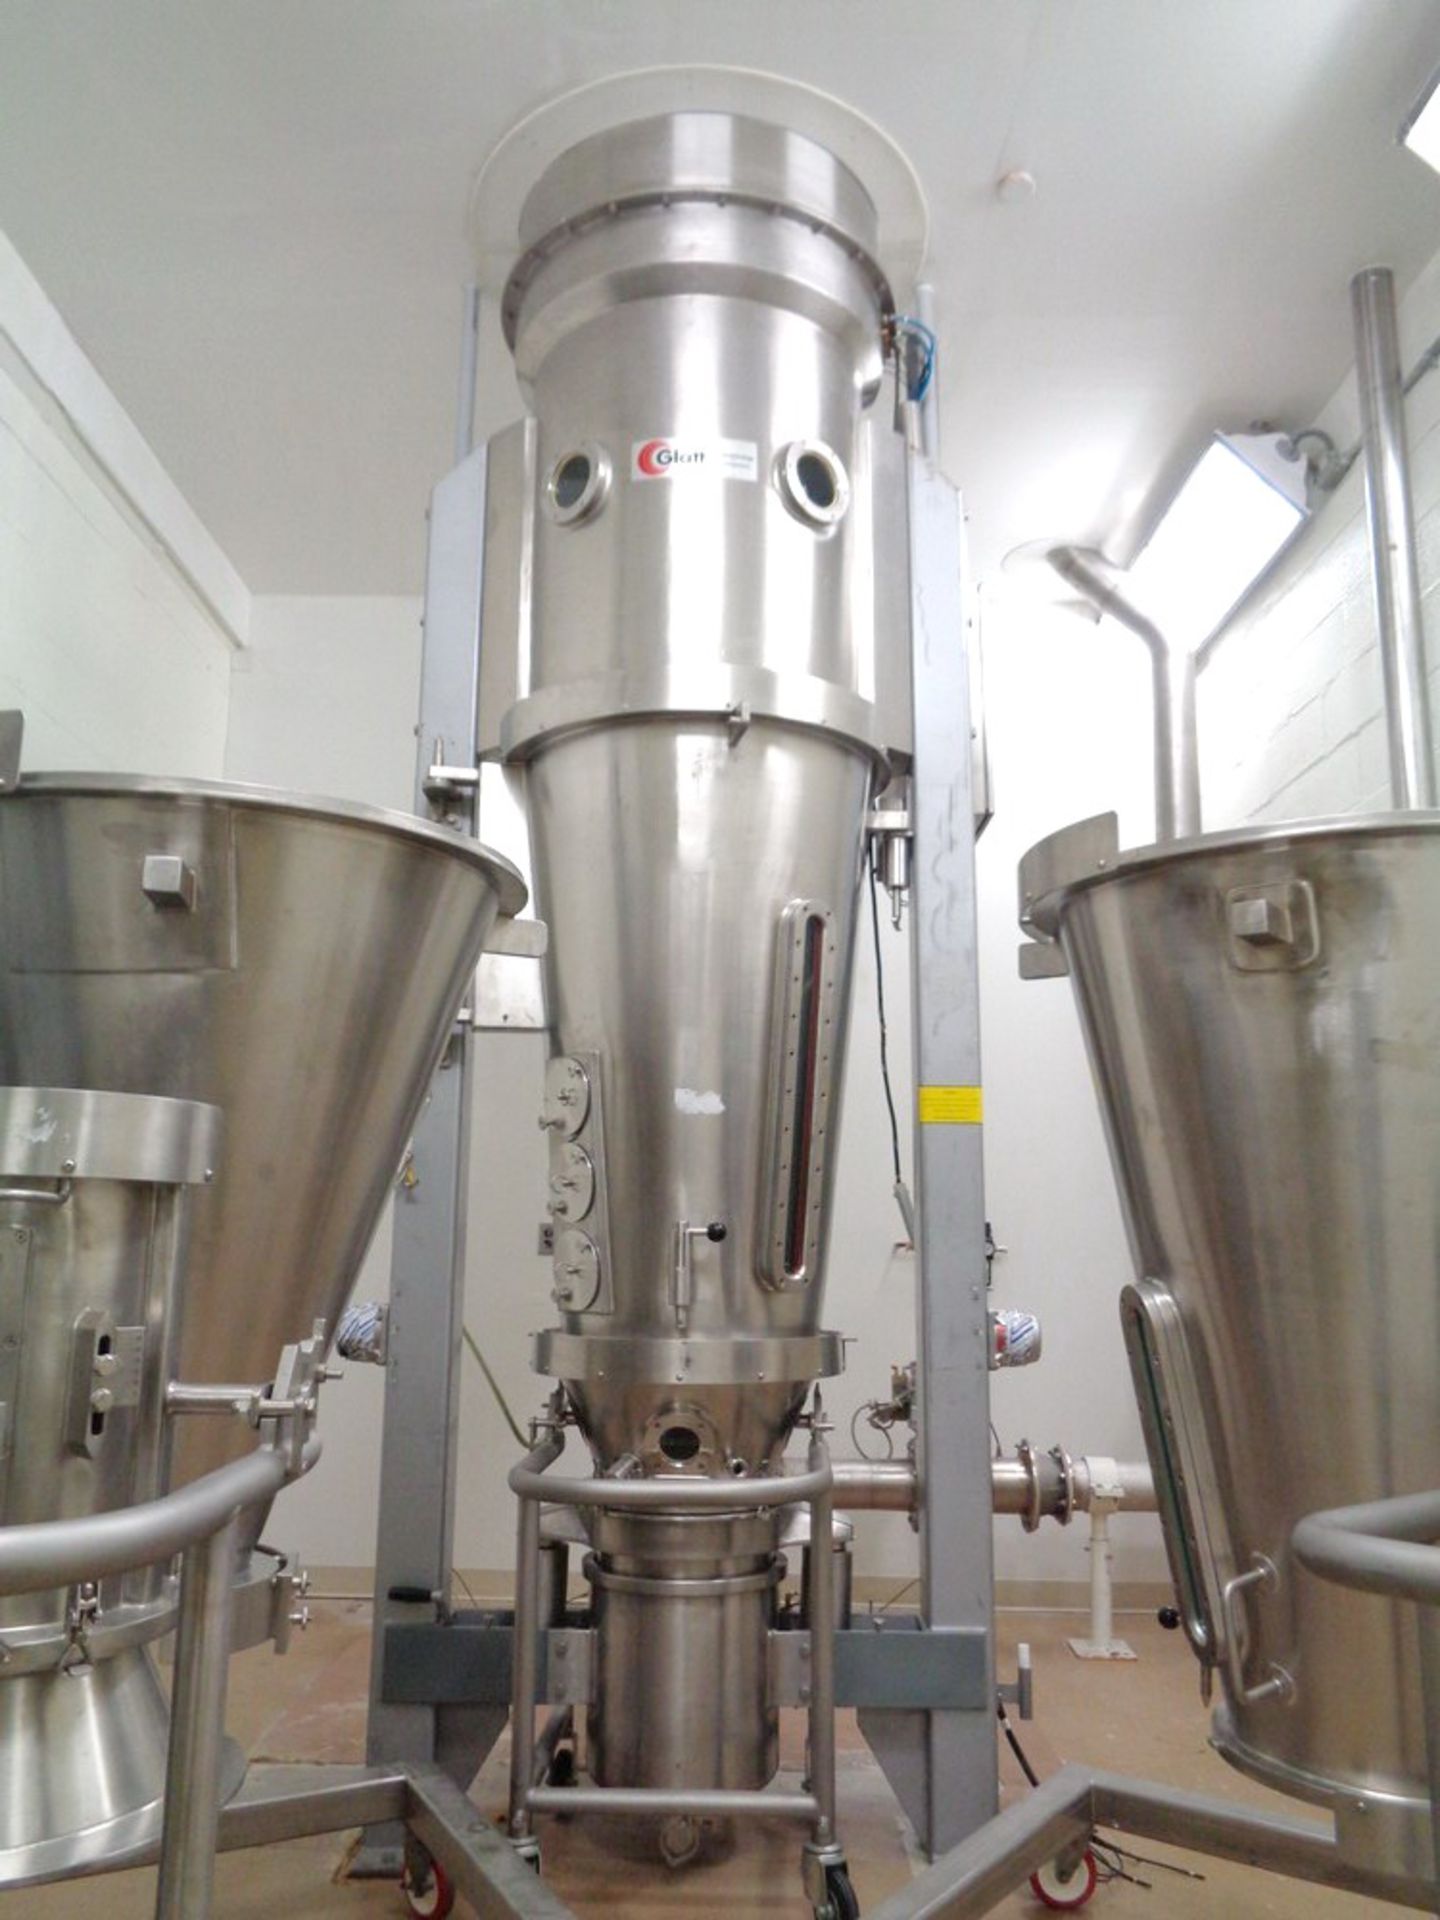 Glatt Fluid Bed Granulator with 9" Wurster, 22L and 45L Drying Inserts, Model GPCG-15, SN 5313. - Image 3 of 25